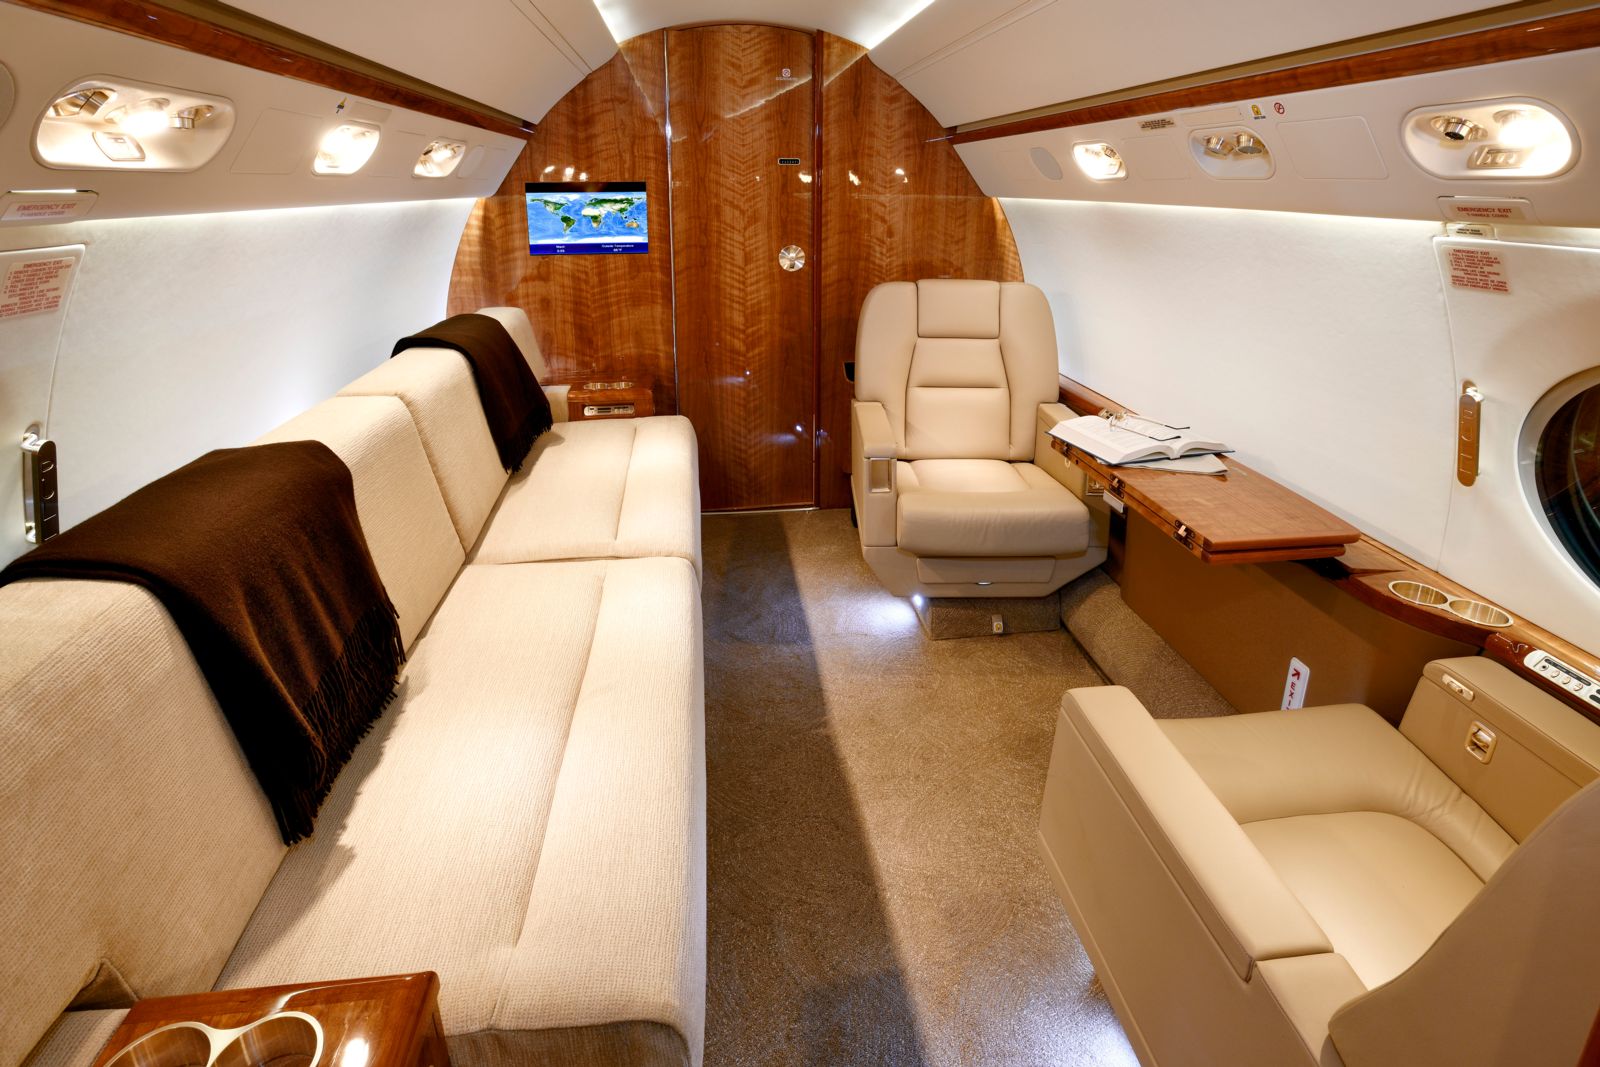 Gulfstream G550  S/N 5389 for sale | gallery image: /userfiles/images/G550_SN5389/aft%20aft.jpg